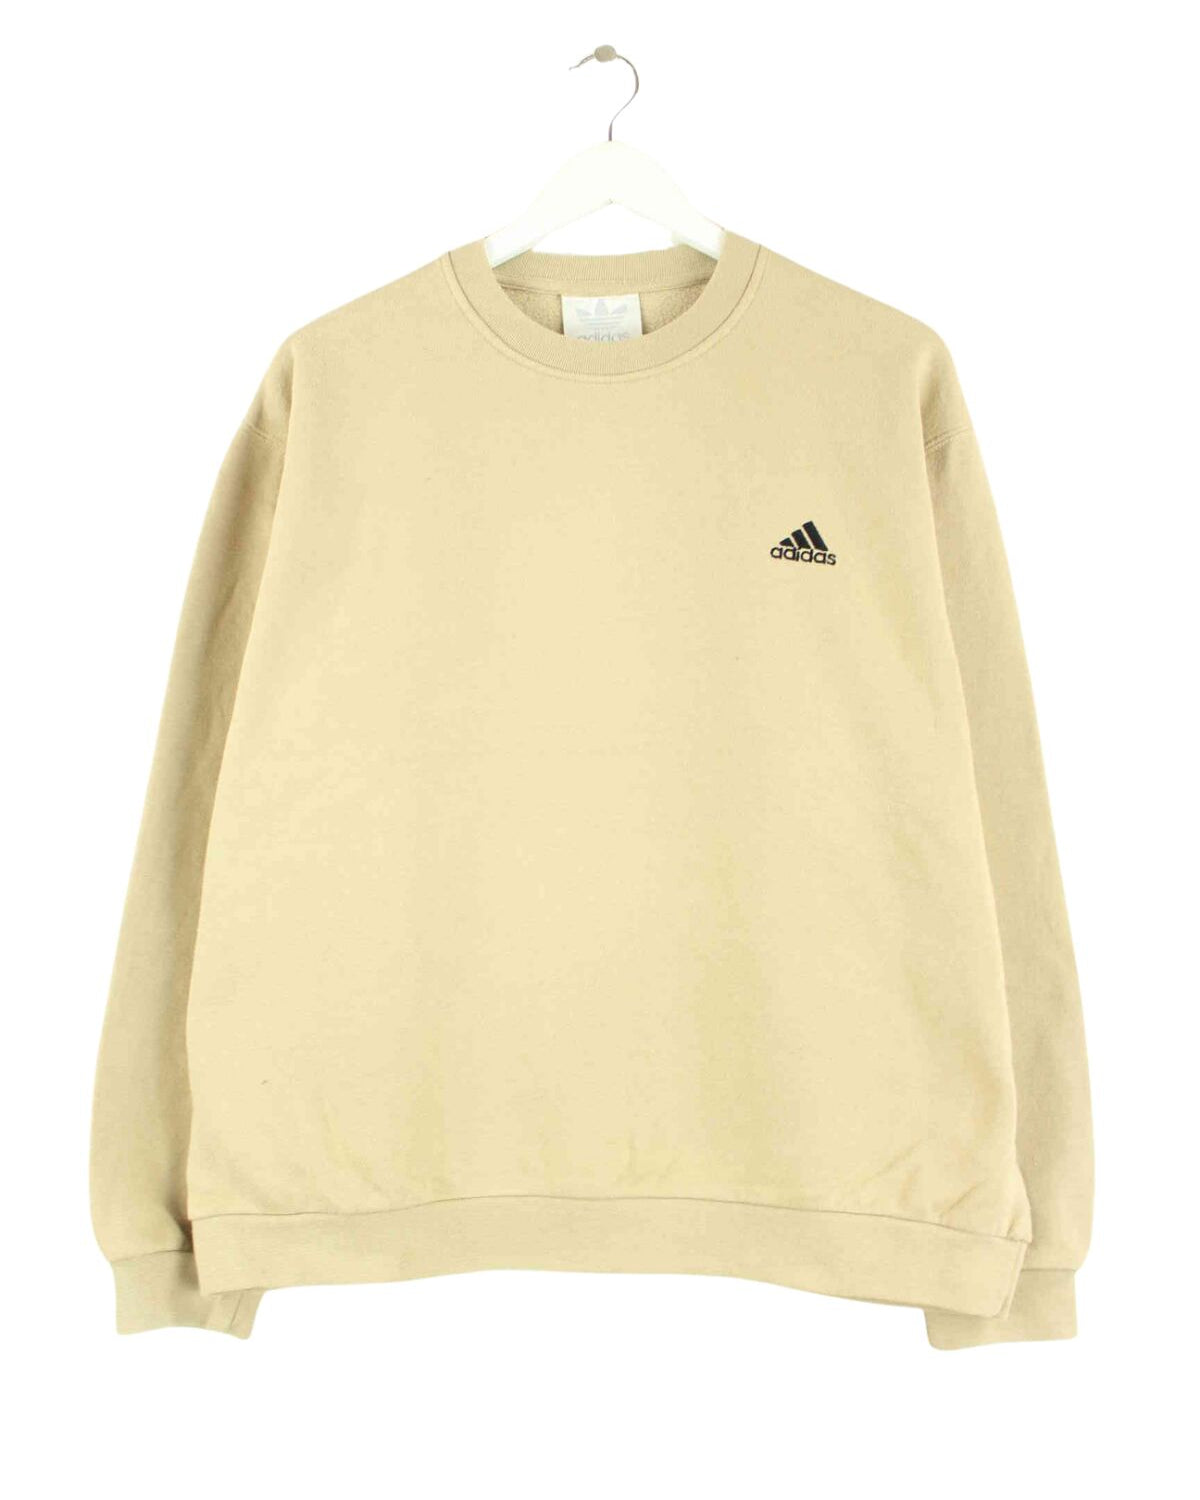 Adidas 80s Vintage Embroidered Sweater Beige L (front image)